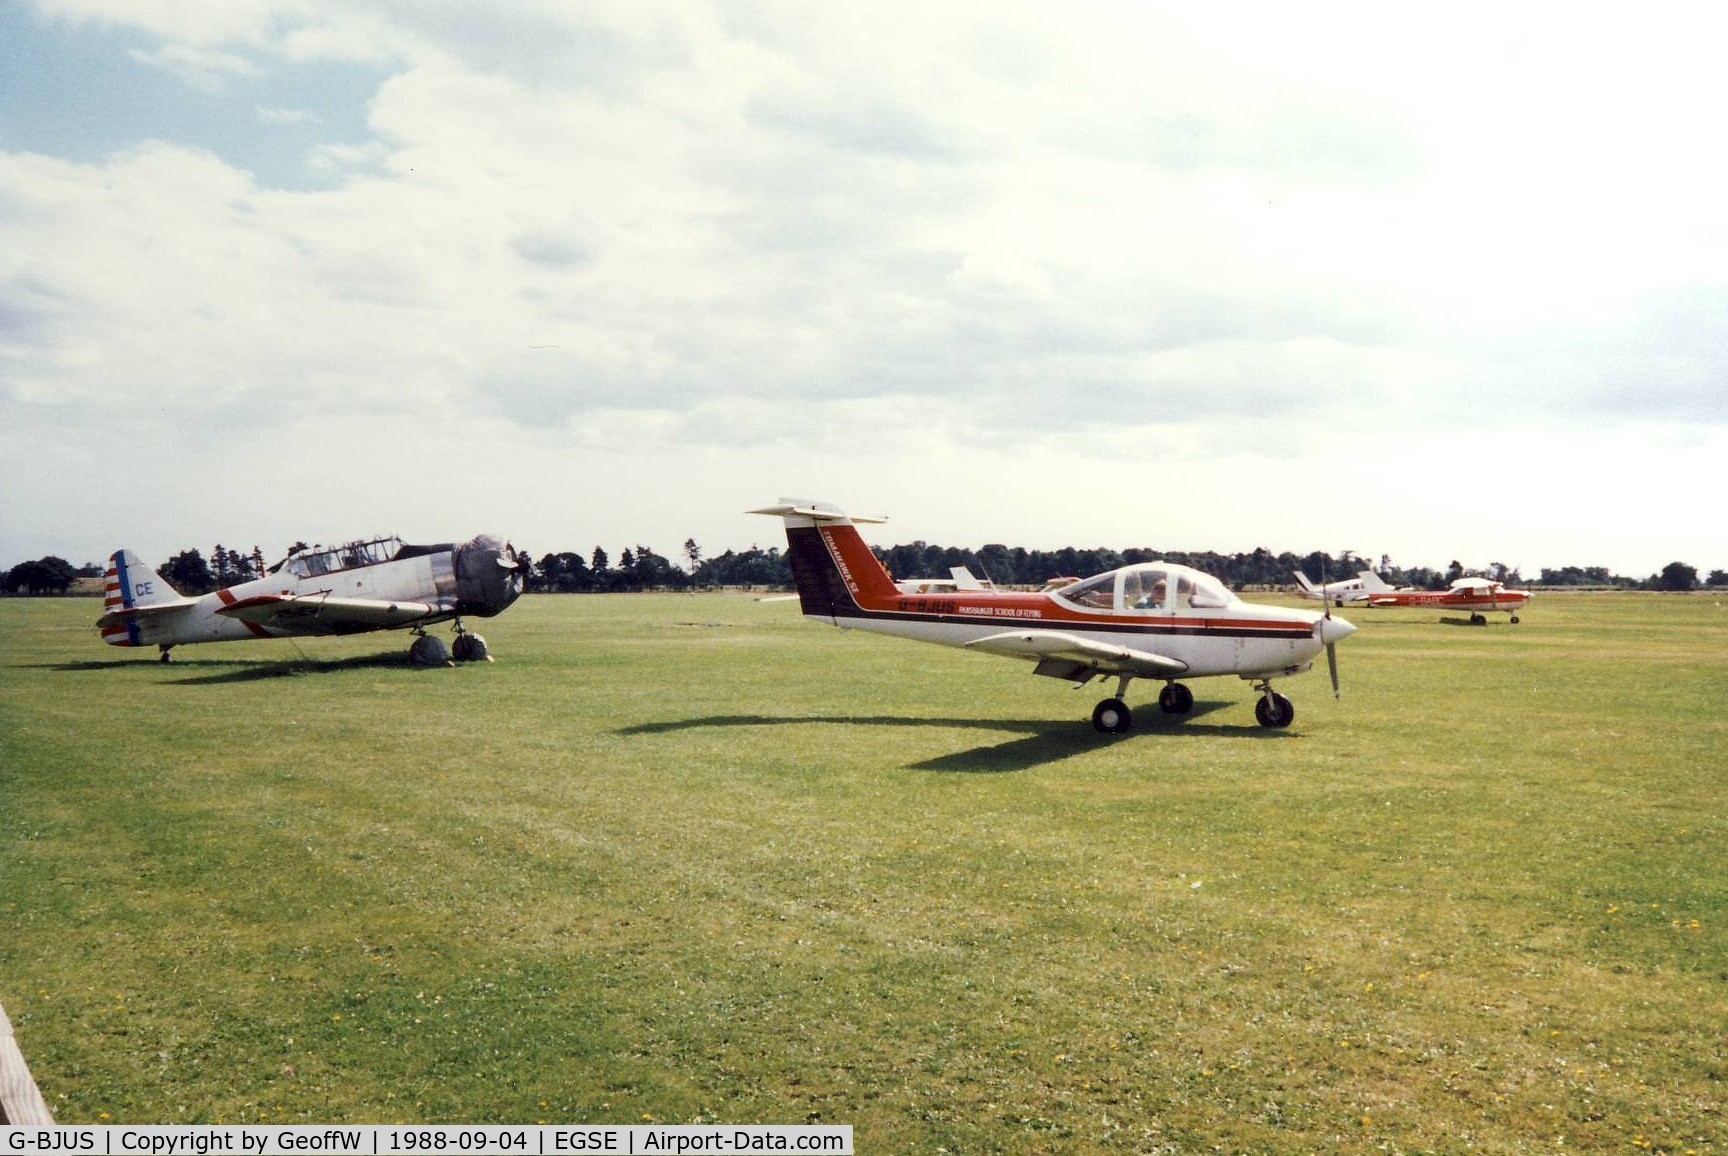 G-BJUS, 1980 Piper PA-38-112 Tomahawk Tomahawk C/N 38-80A0065, A visitor from The Panshanger School of Flying. Harvard G-BICE in the background.